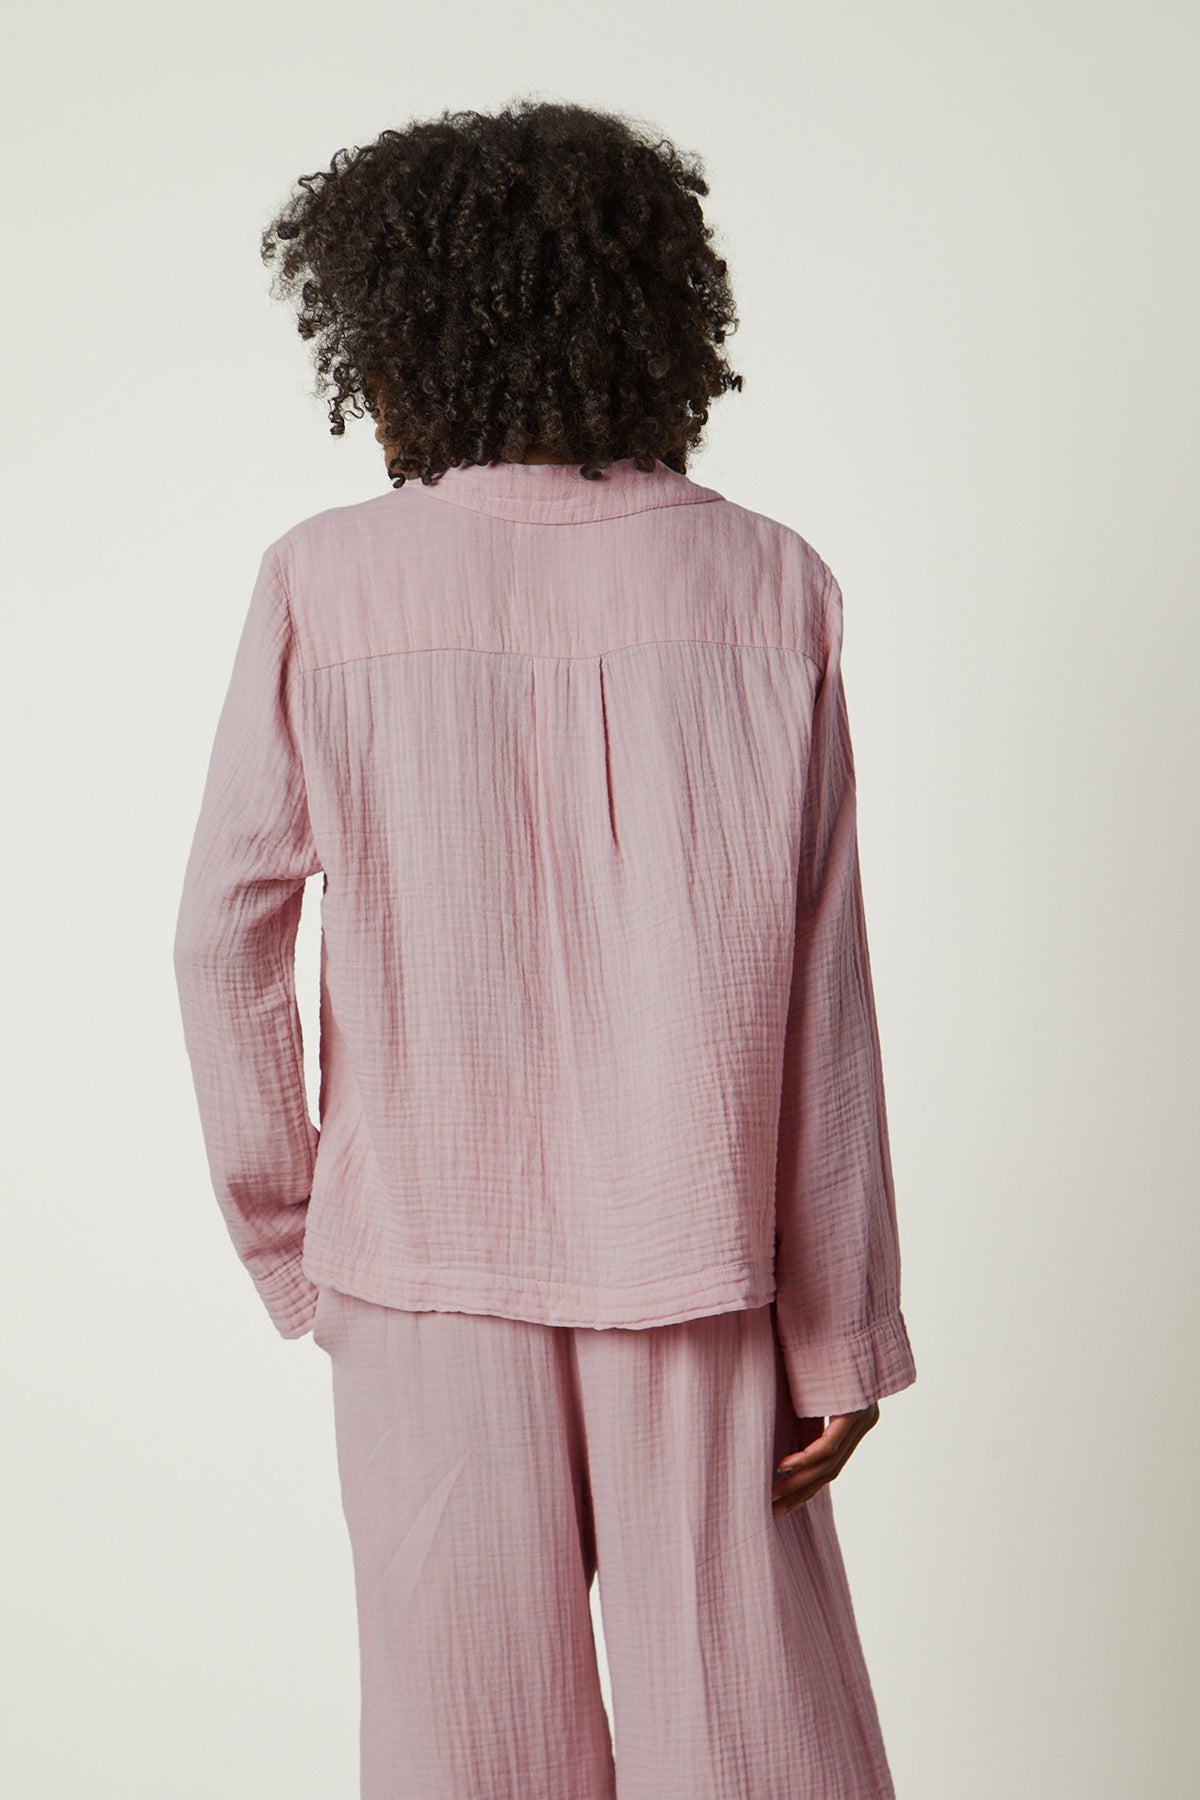 the back view of a woman in Jenny Graham Home's pink PAJAMA SHIRT.-26326814195905